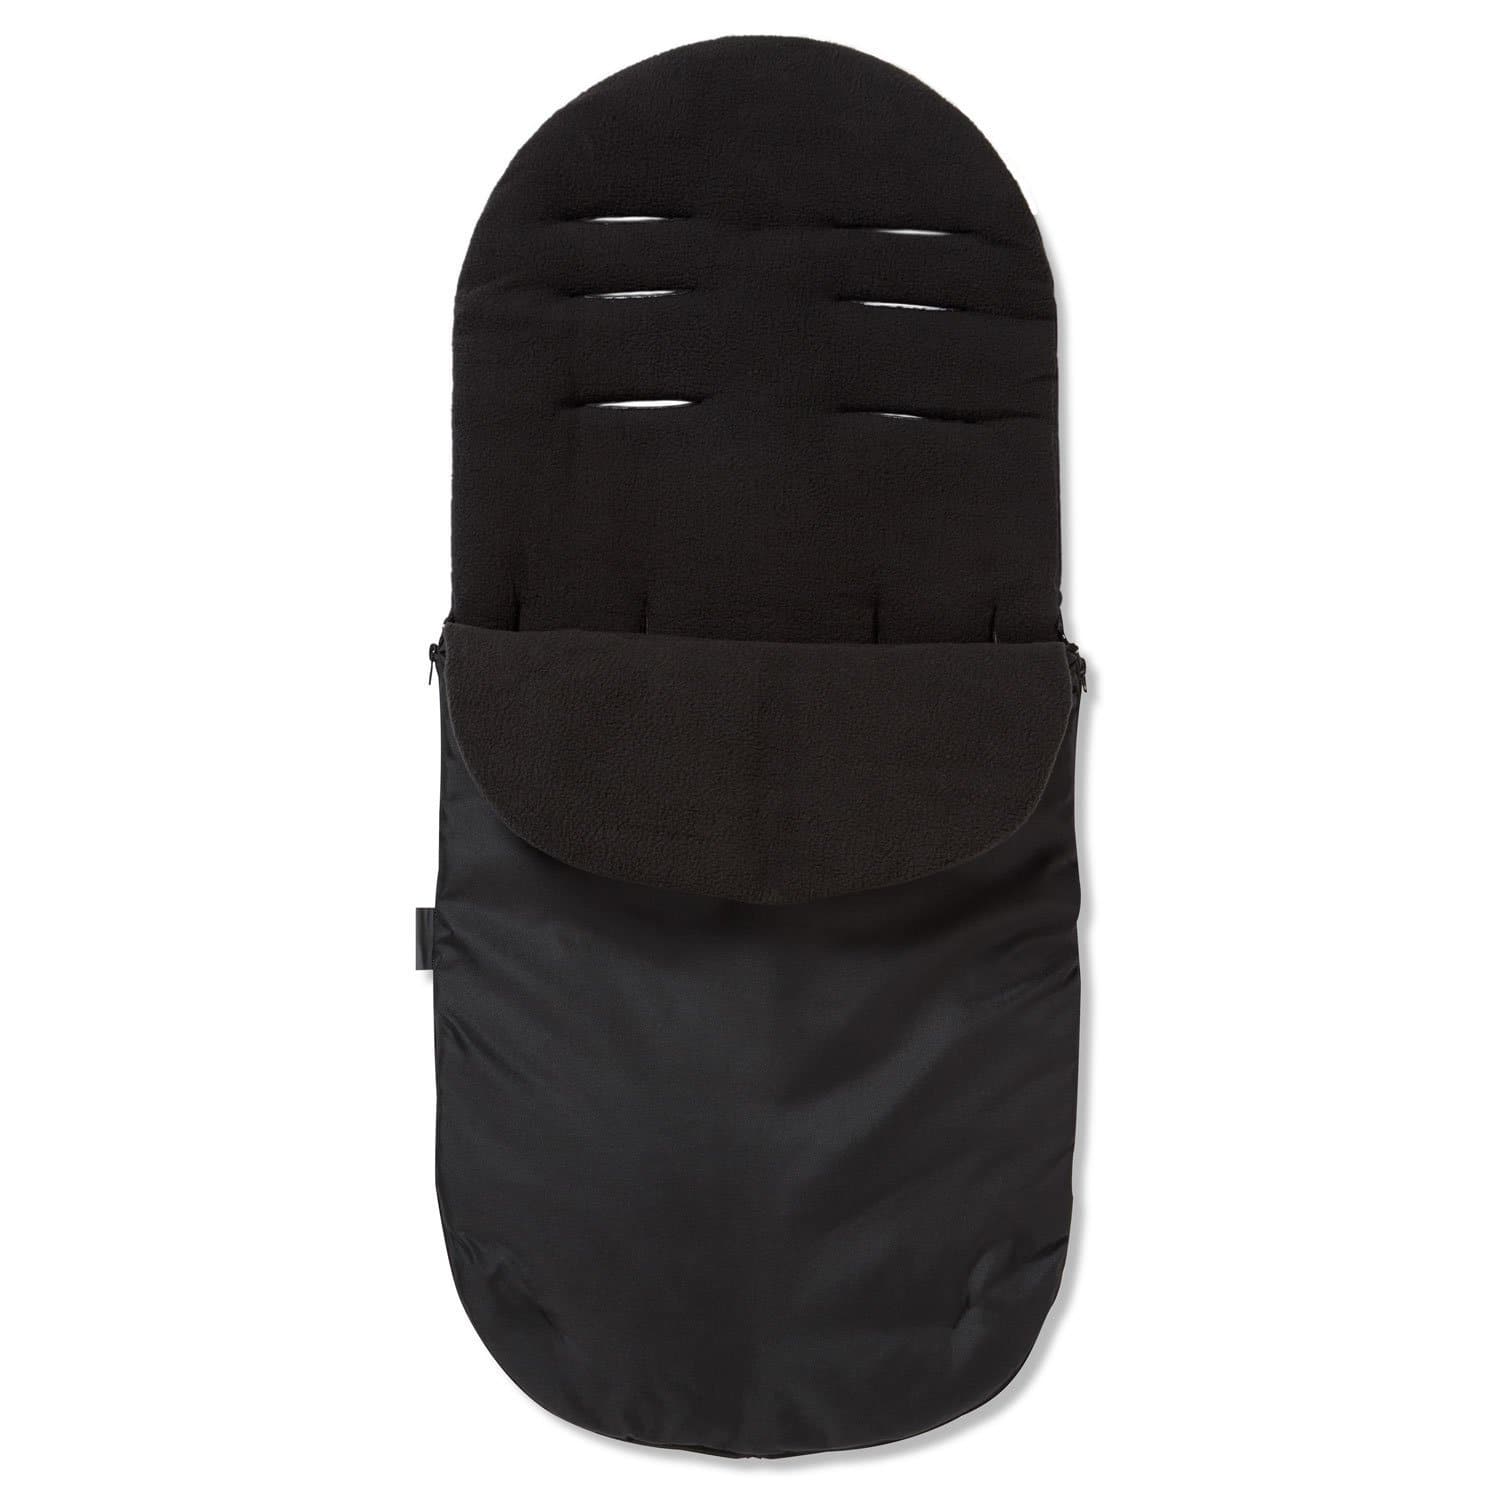 Footmuff / Cosy Toes Compatible with Mee-Go - Black / Fits All Models | For Your Little One